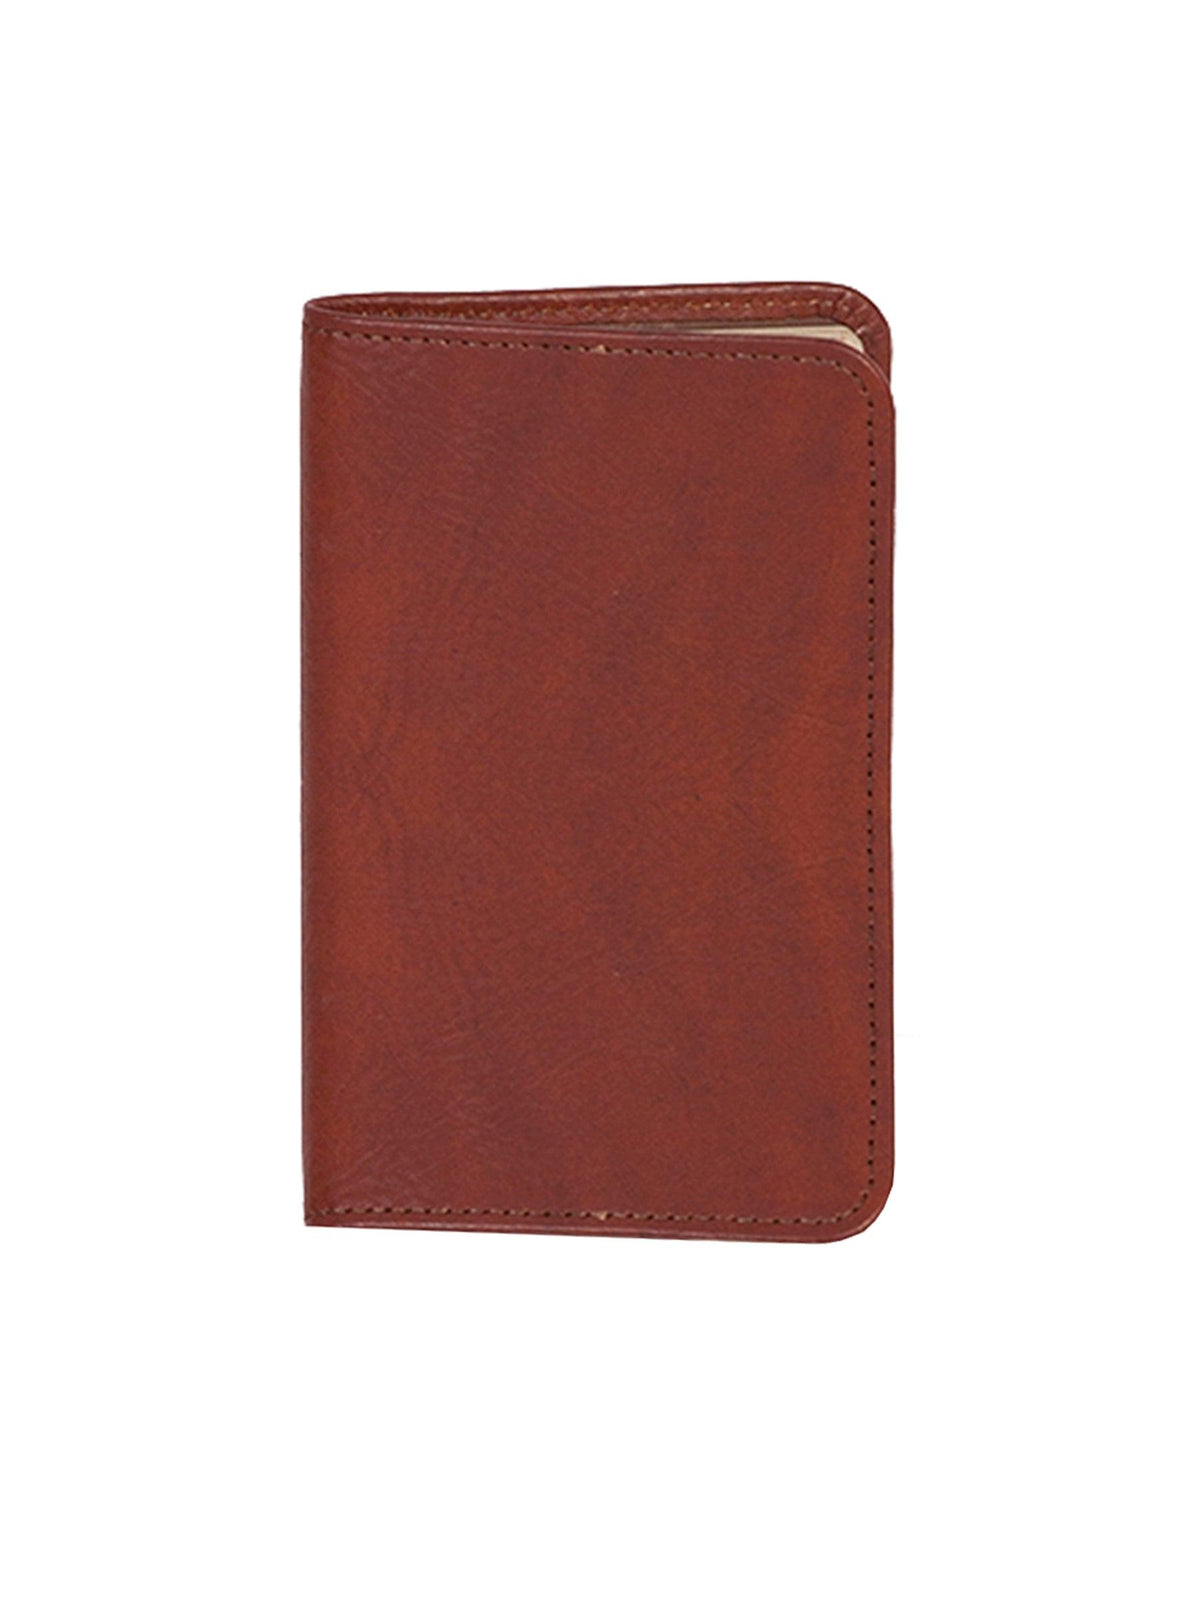 Scully COGNAC BLANK PERSONAL NOTER - Flyclothing LLC